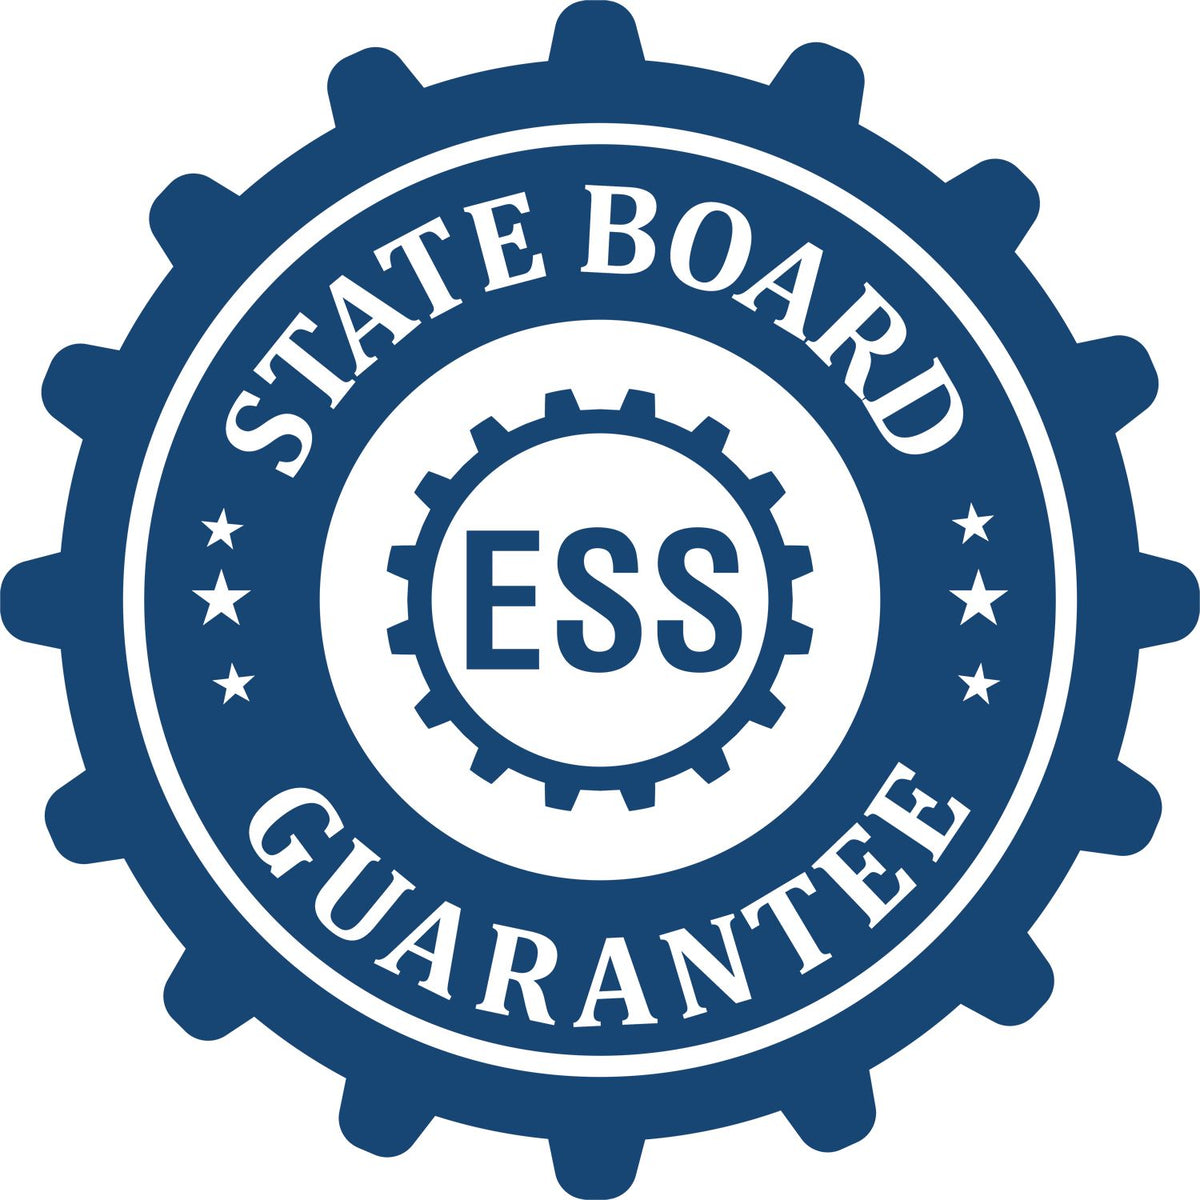 An emblem in a gear shape illustrating a state board guarantee for the Utah Professional Engineer Seal Stamp product.